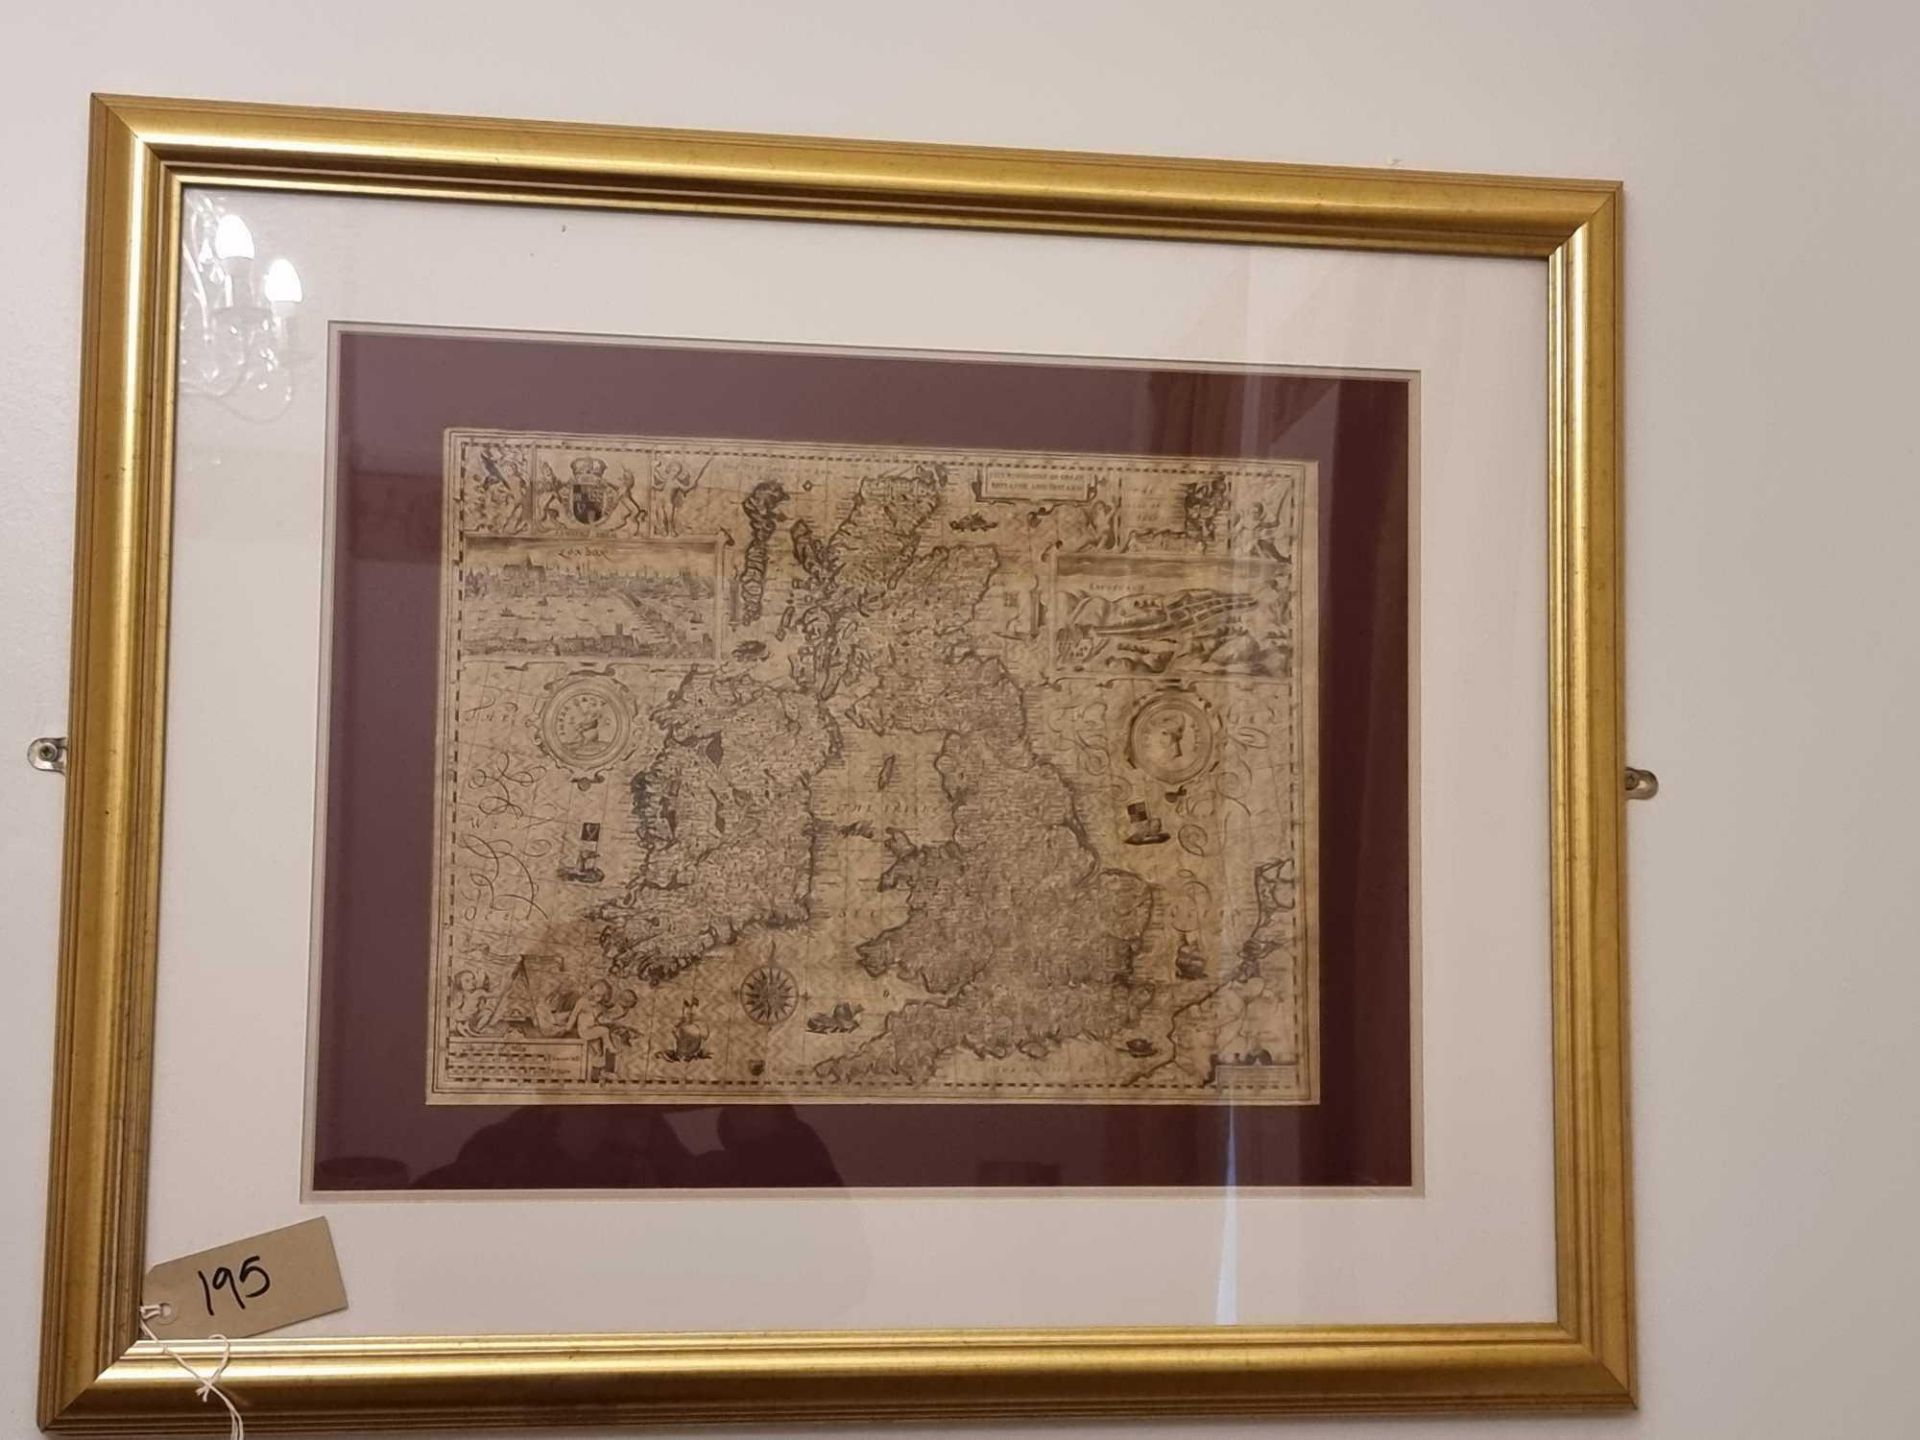 A Framed Vintage Map Of The Kingdom Of United Kingdom And Ireland 84 X 70cm (Room 5) - Image 2 of 3